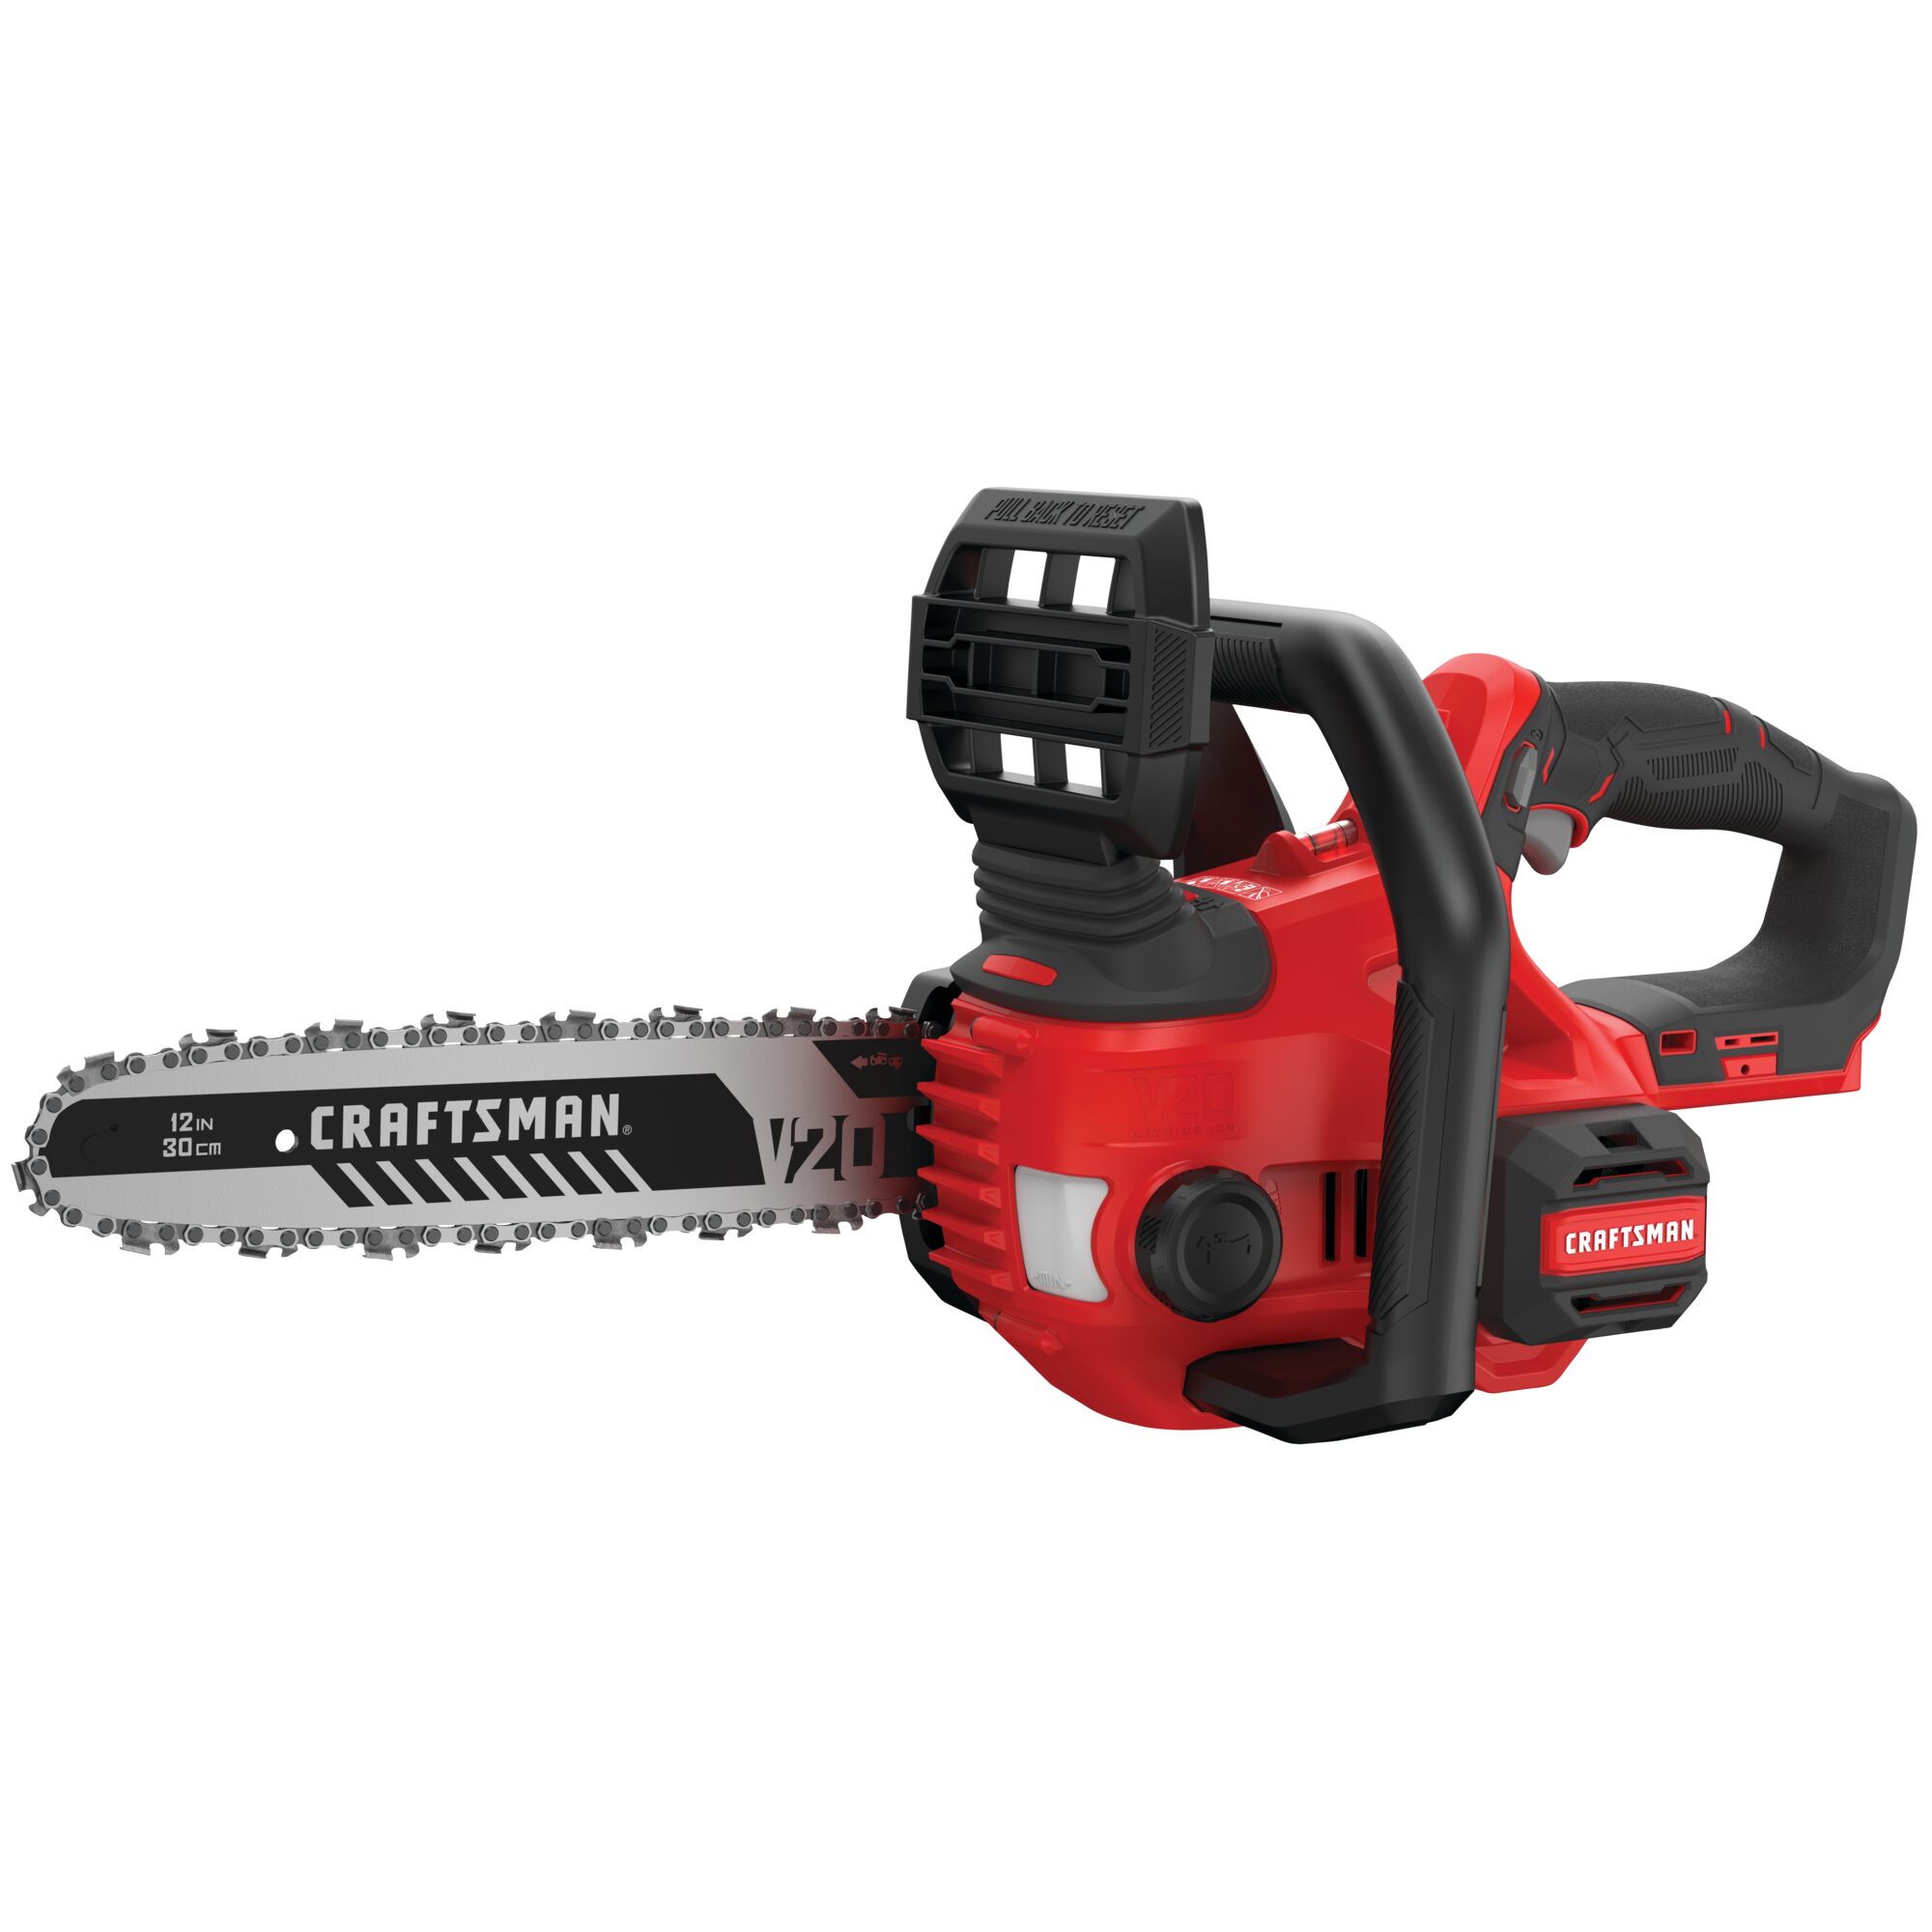 View of CRAFTSMAN Chain Saws on white background